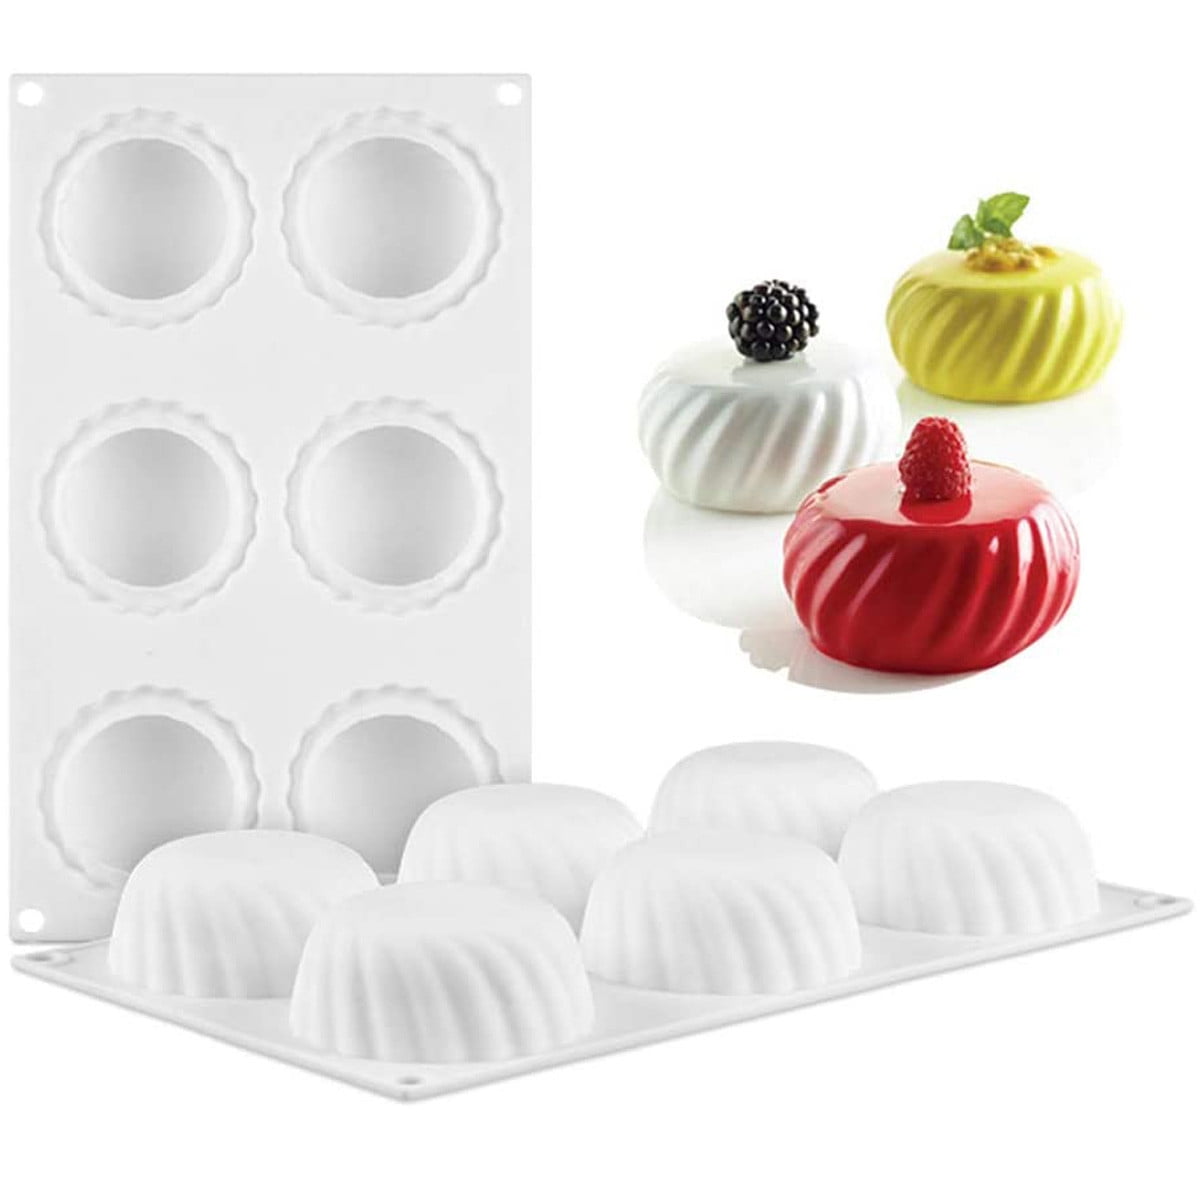 Details about   Silicone Cake Mould Muffin Chocolate Mold Baking Cup Cookie G0L0 non-stick M4G7 